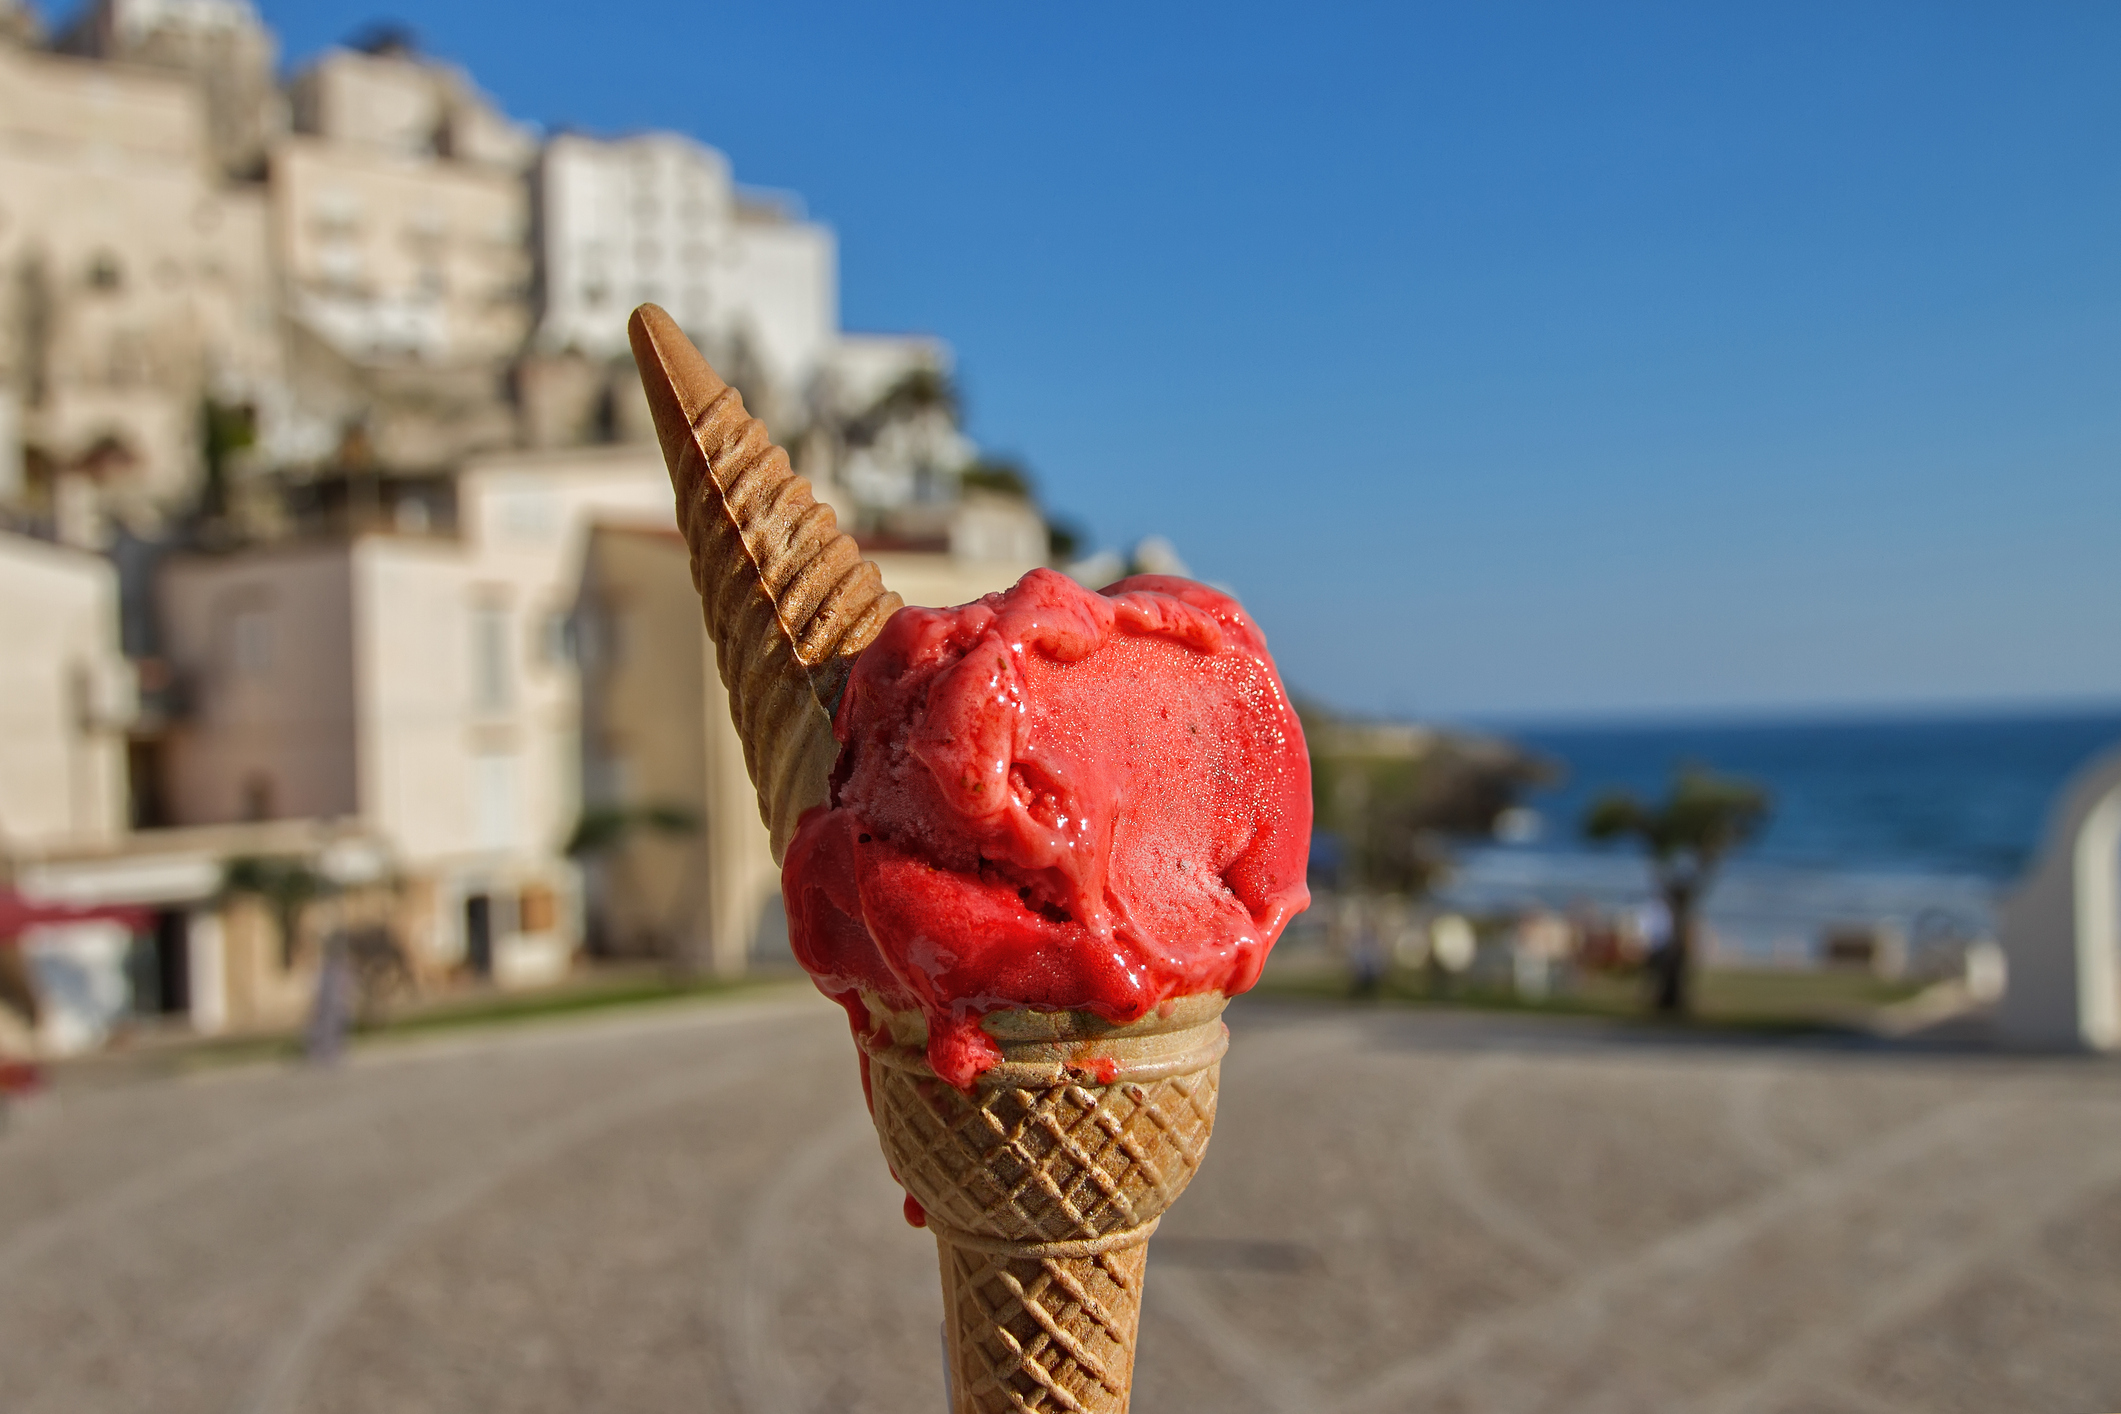 The best ice creams in Italy: here are the 8 tastes arrived in the final!